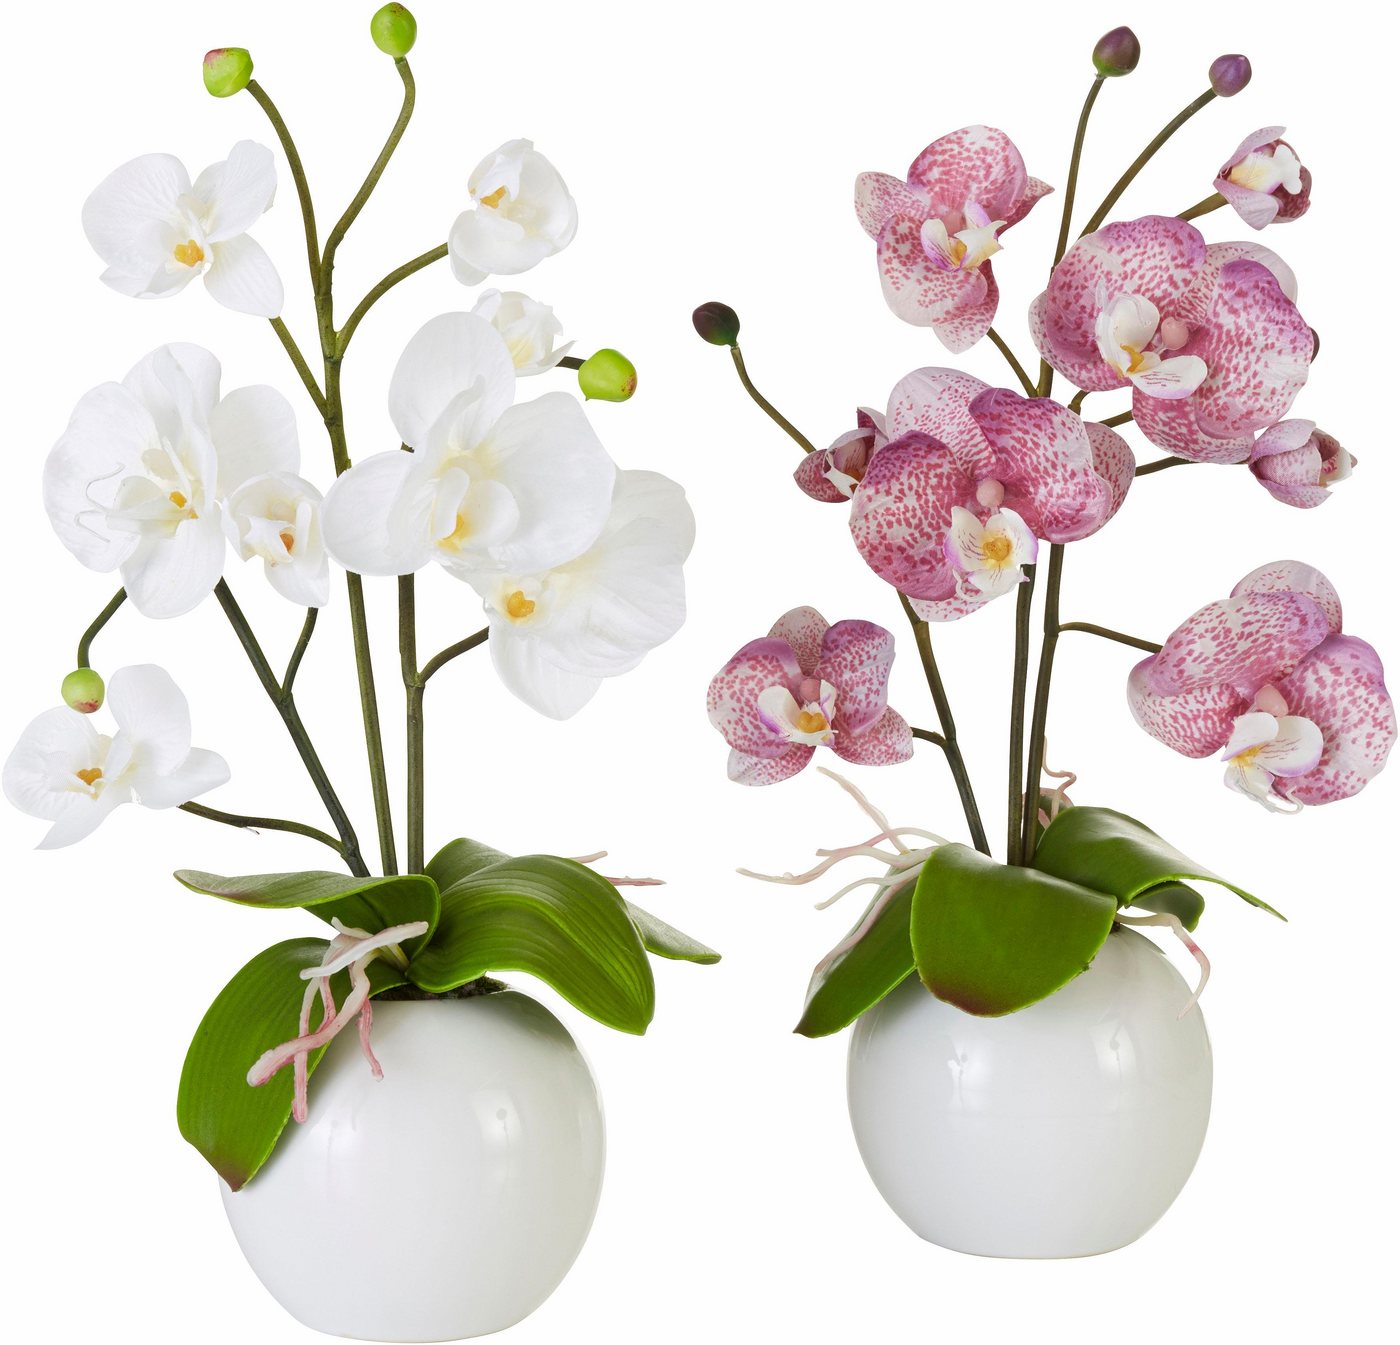 Kunstpflanze Orchidee Orchidee, I.GE.A., Höhe 35 cm von I.GE.A.